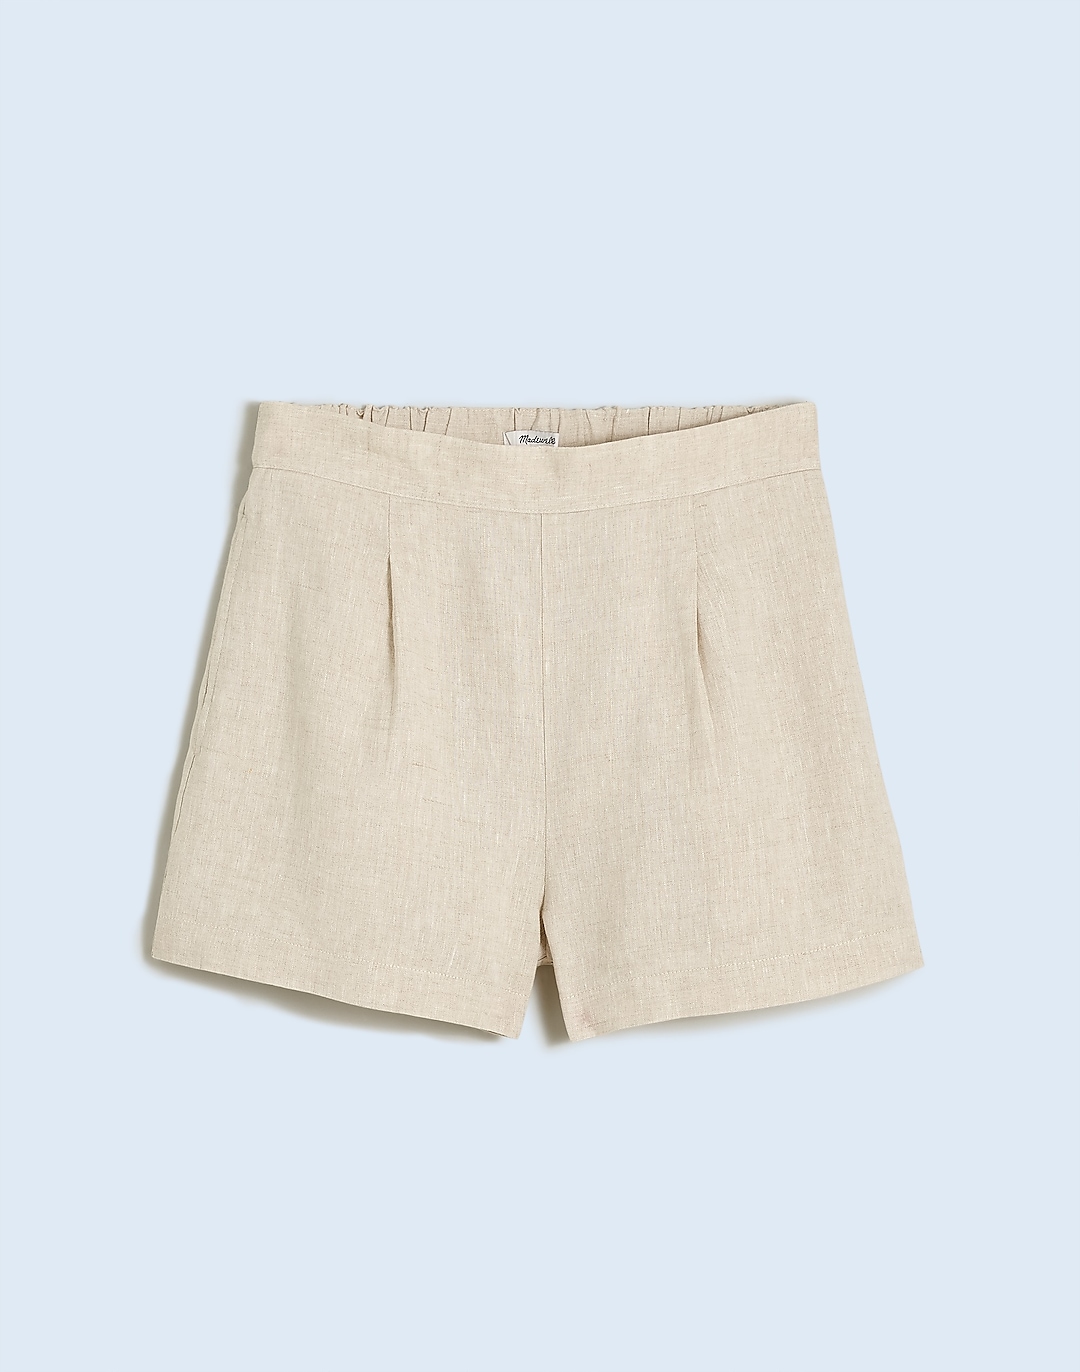 Clean Pull-On Shorts in 100% Linen | Madewell